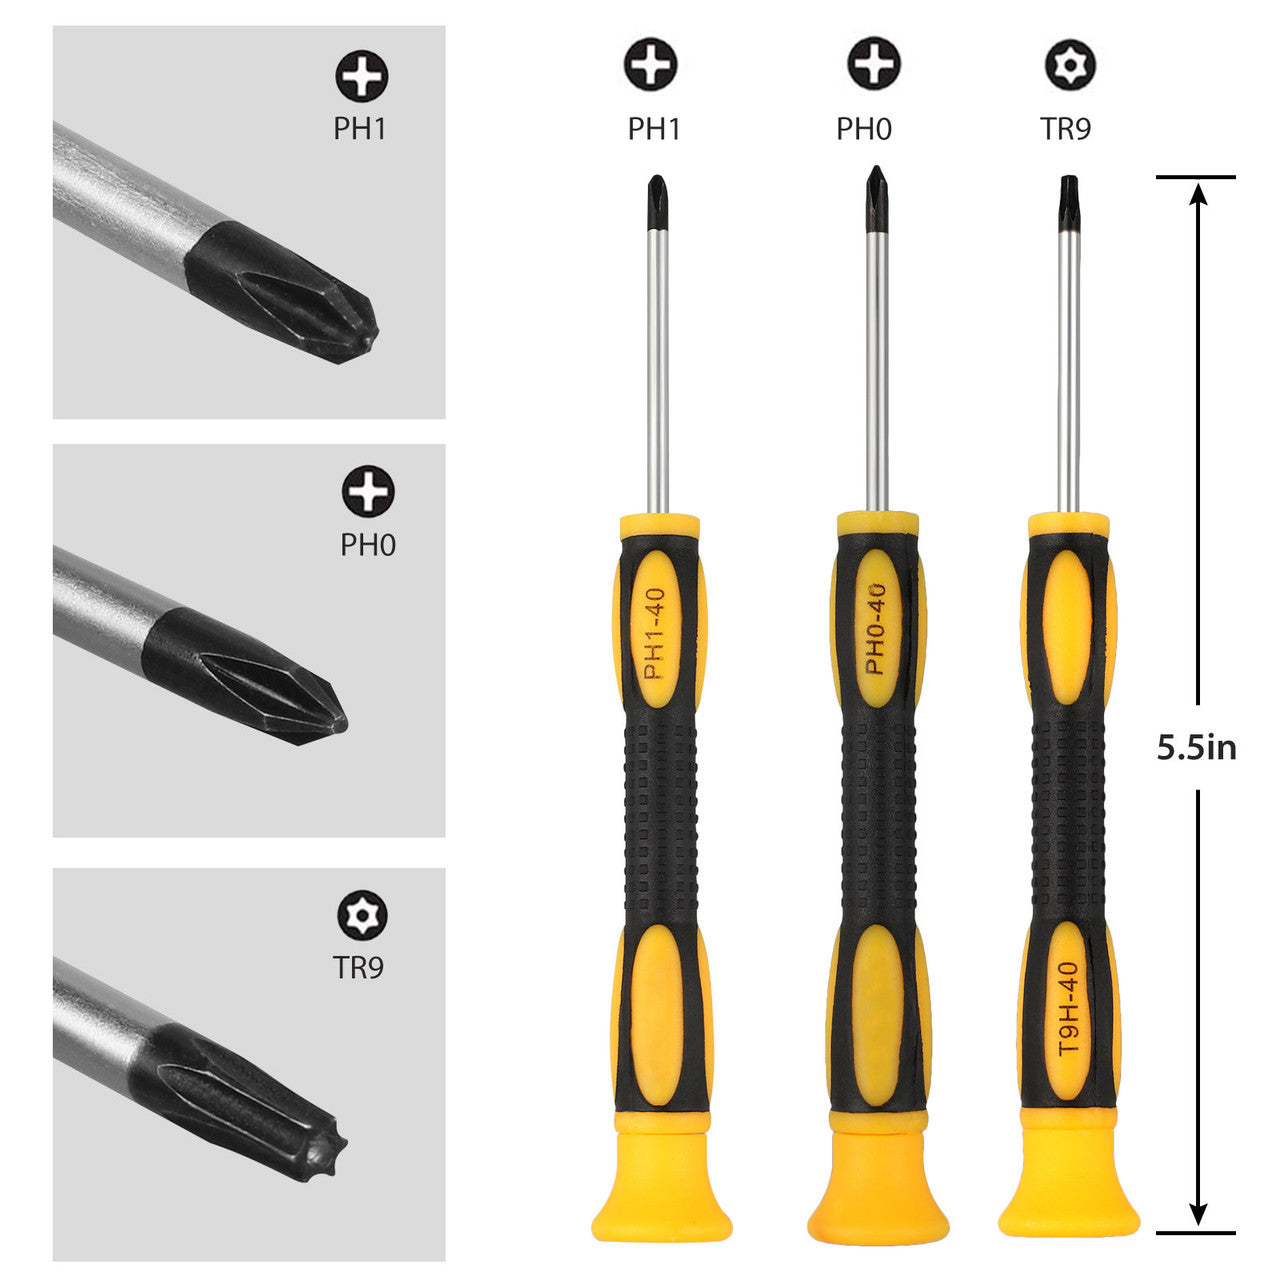 PH0 PH1 T9 Screwdriver Tool Kit with Prying Tool and Cleaning Brush Repair for PlayStation PS4 Controller,9pcs